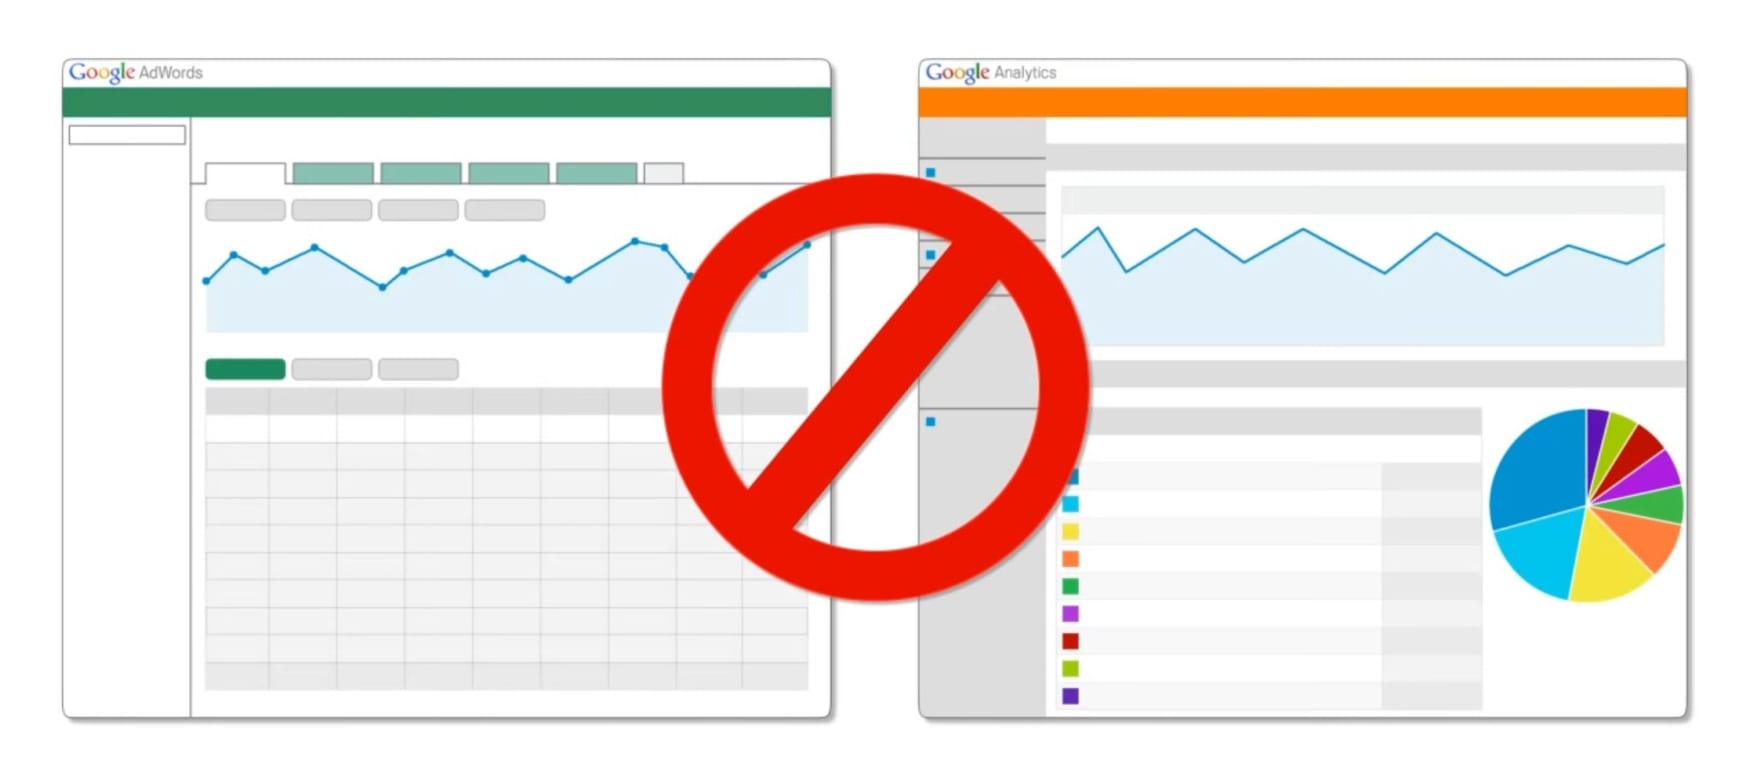 3 Essential facts and differences about conversions on Google Analytics and Google Adwords